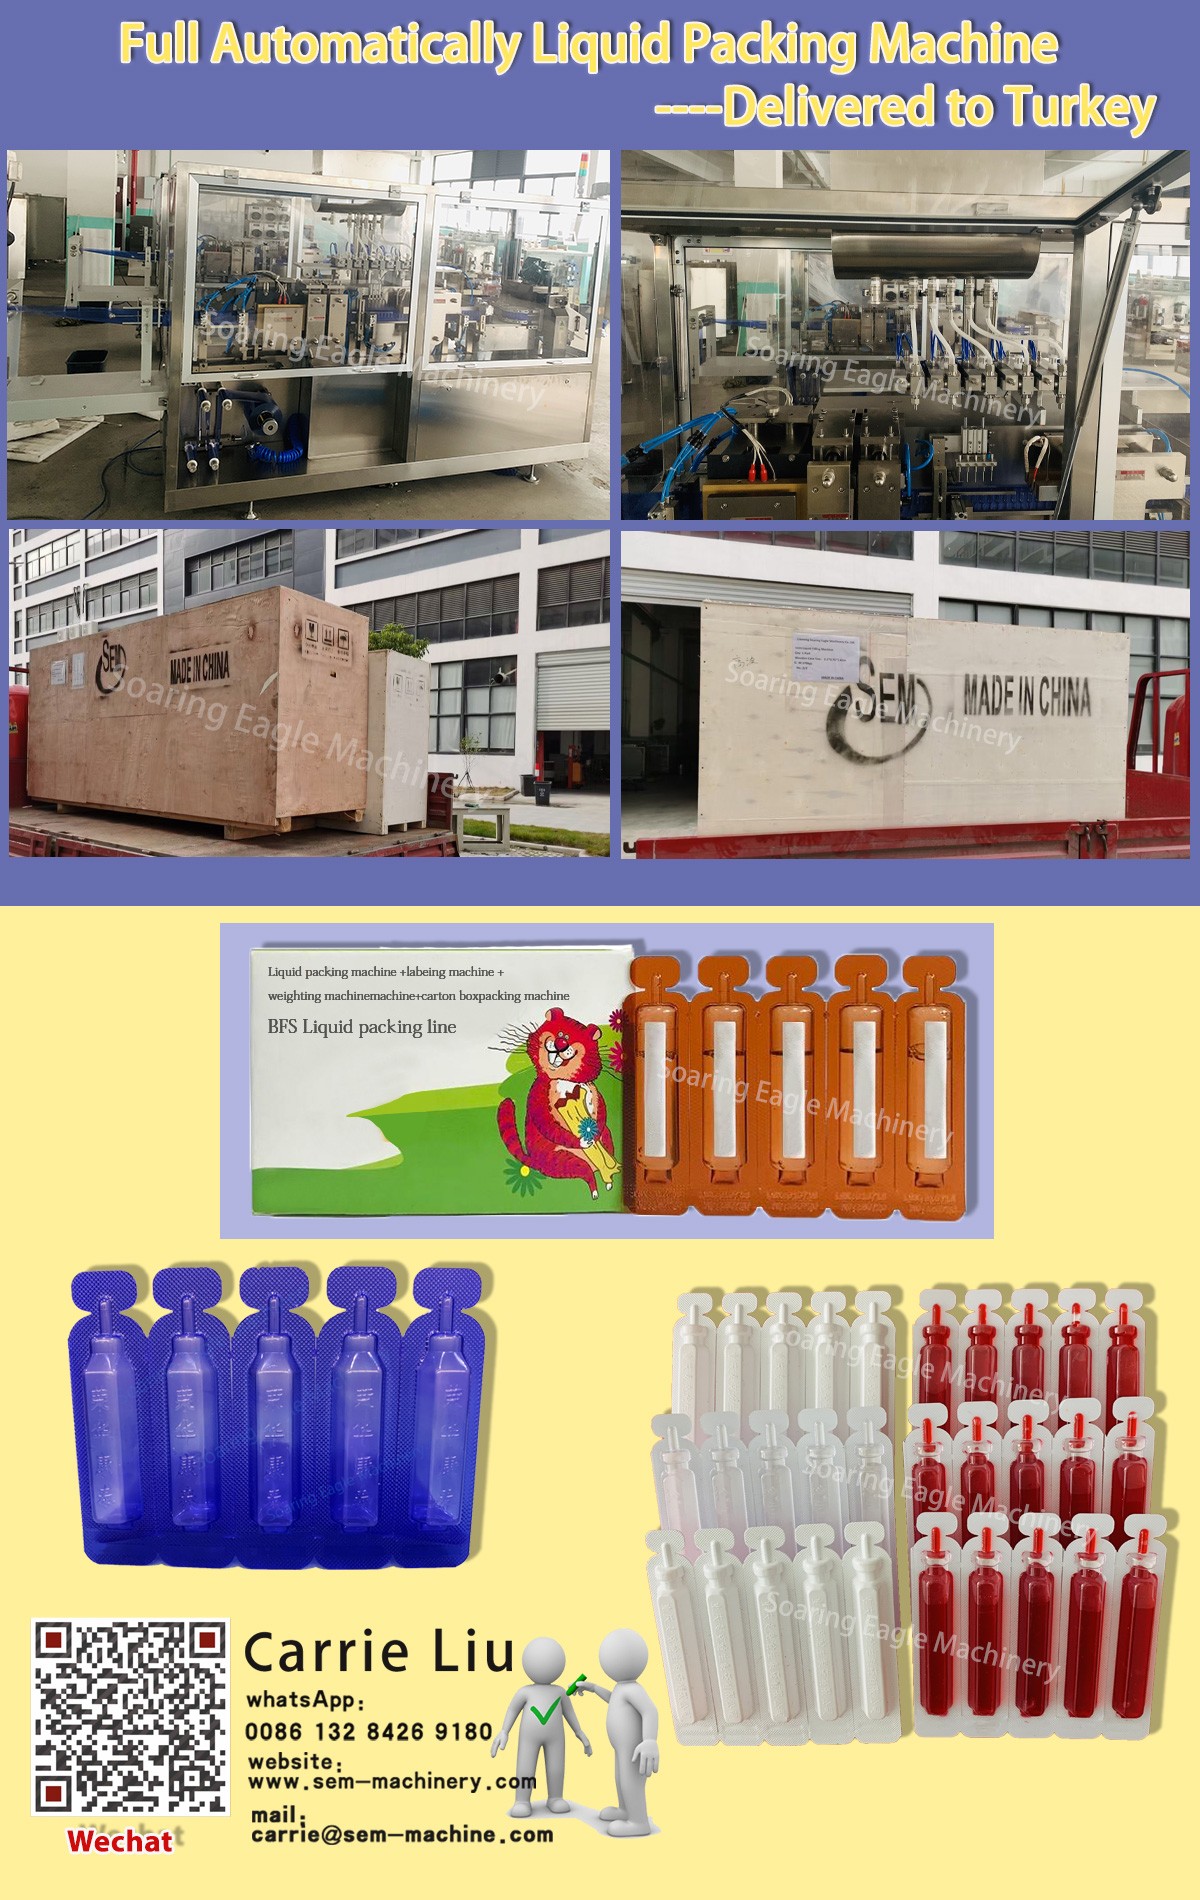 Full automatically liquid packing machine—delivered to Turkey